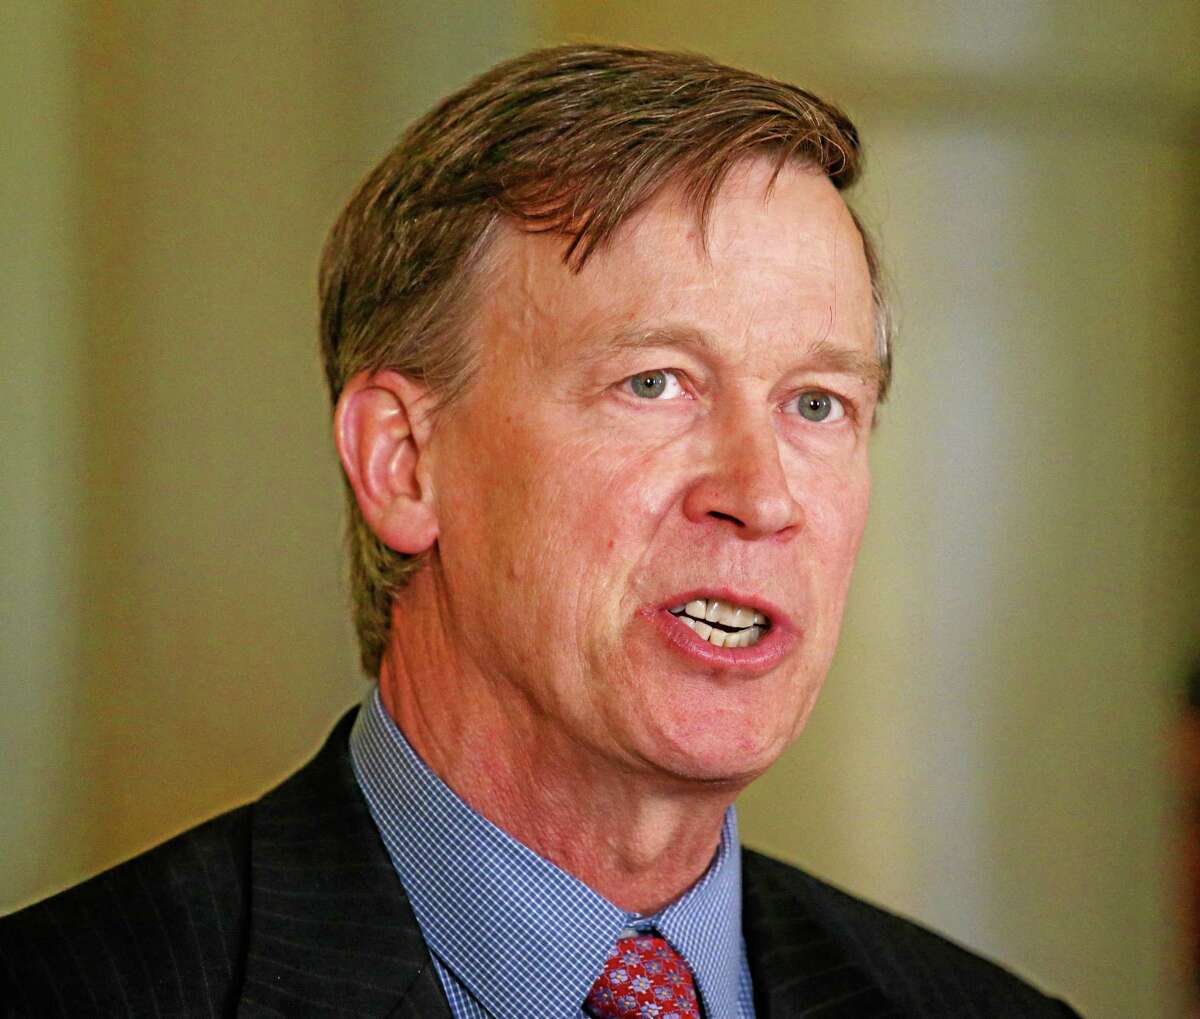 FILE - Colorado Gov. John Hickenlooper speaks at a news conference at the Capitol in Denver in this Wednesday, May 22, 2013 file photo. Hickenlooper Saturday afternoon May 17, 2014 will sign Colorado's "Right To Try" bill, which was passed unanimously in the state Legislature. The "Right To Try" law allows terminally ill patients to obtain experimental drugs without getting federal approval. The bill doesn't require drug companies to provide any drug outside federal parameters, and there's no indication pharmaceutical companies will do so. (AP Photo/Ed Andrieski, File)